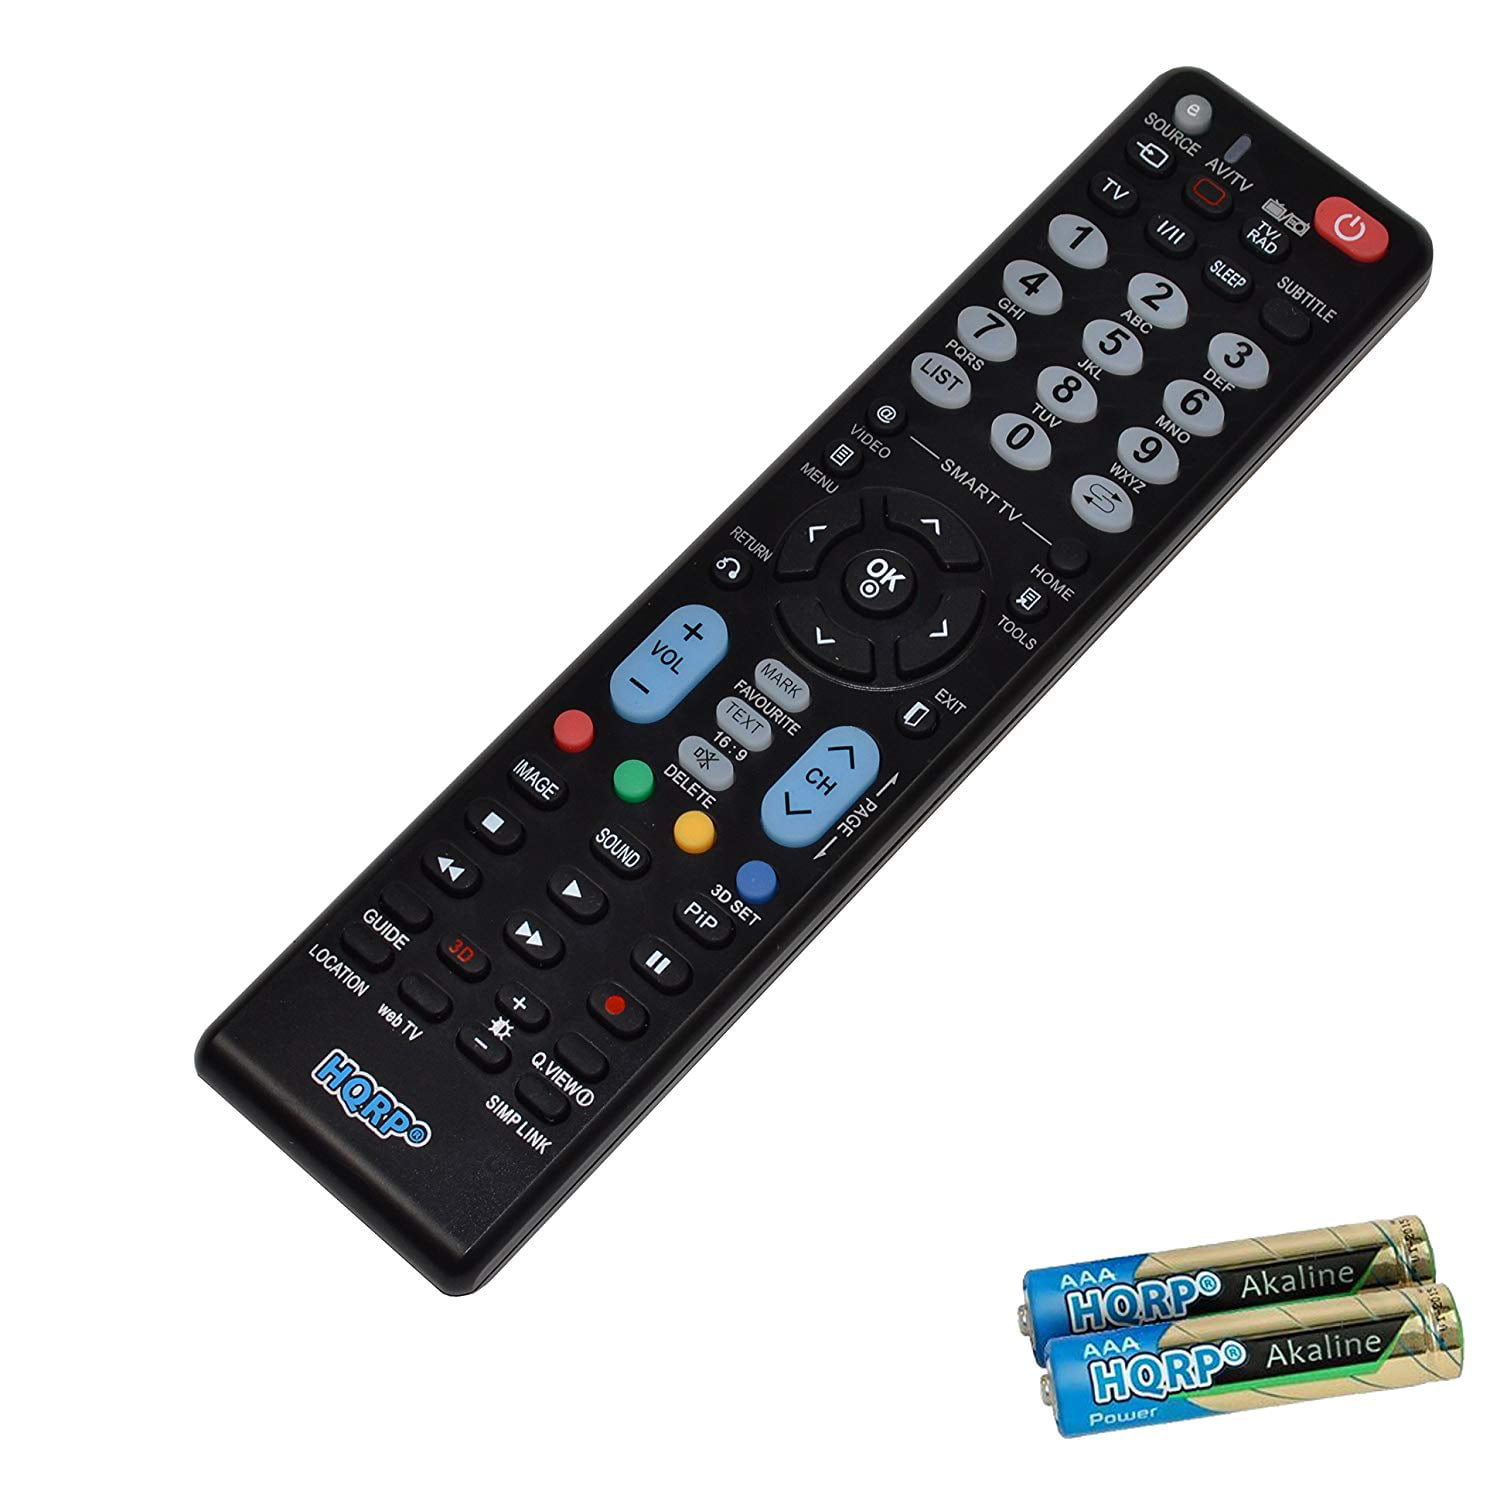 Easy Replacement Remote Control Suitable for LG 42LN5700-UH 47LN5700-UH LCD LED HDTV TV